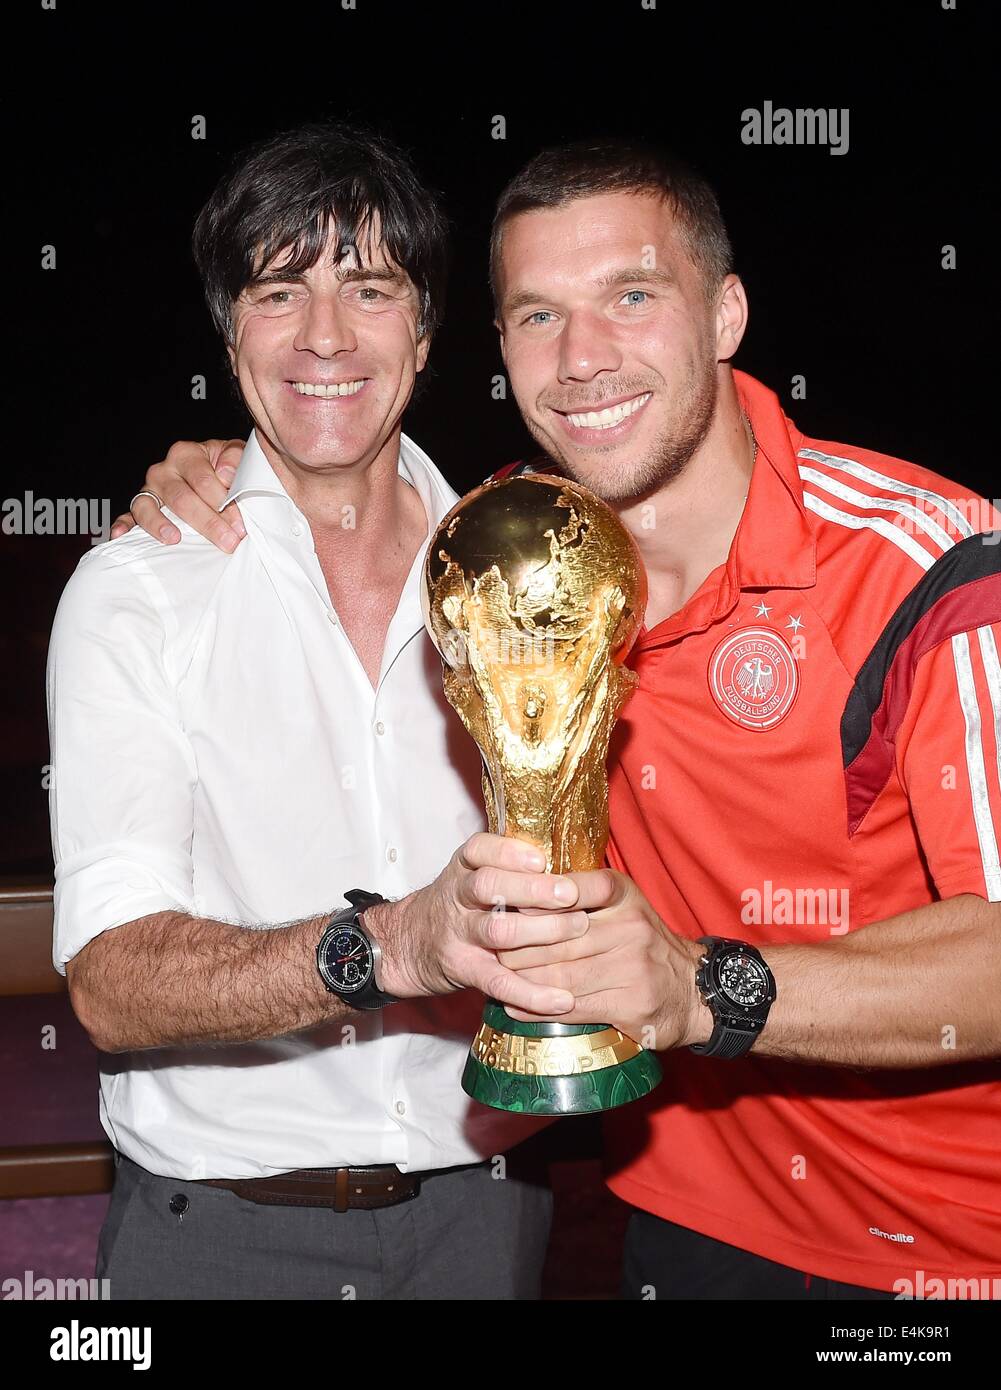 Handout: Rio de Janeiro, Brazil. 14th July, 2014. German national coach Joachim Loew (L) and Lukas Podolski celebrating Germany's victory over Argentina in the Soccer World Cup with the trophy at Hotel Sheraton in Rio De Janeiro, Brazil on 13 July 2014. Germany won the World Cup 1-0 after defeating Argentina. (: Image for in connection with the current reporting on the World Cup and together with the source: Photo: Markus Gilliar/DFB/dpa.) Credit:  dpa picture alliance/Alamy Live News Stock Photo